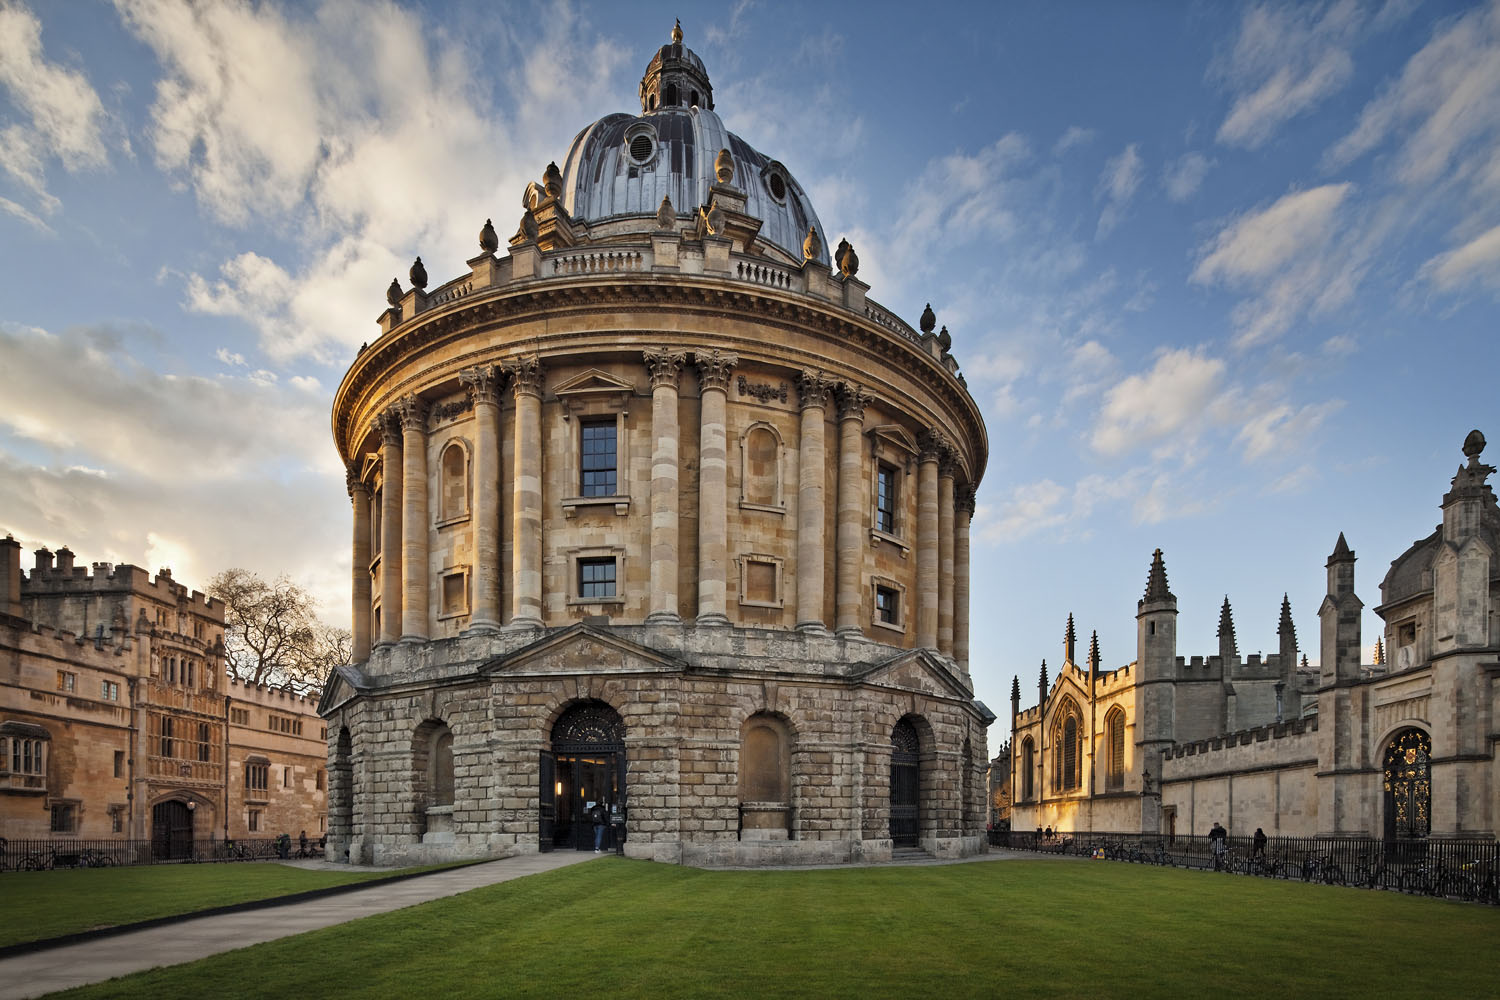  Radcliffe Camera, Bodleian Libraries, University of Oxford, UK 